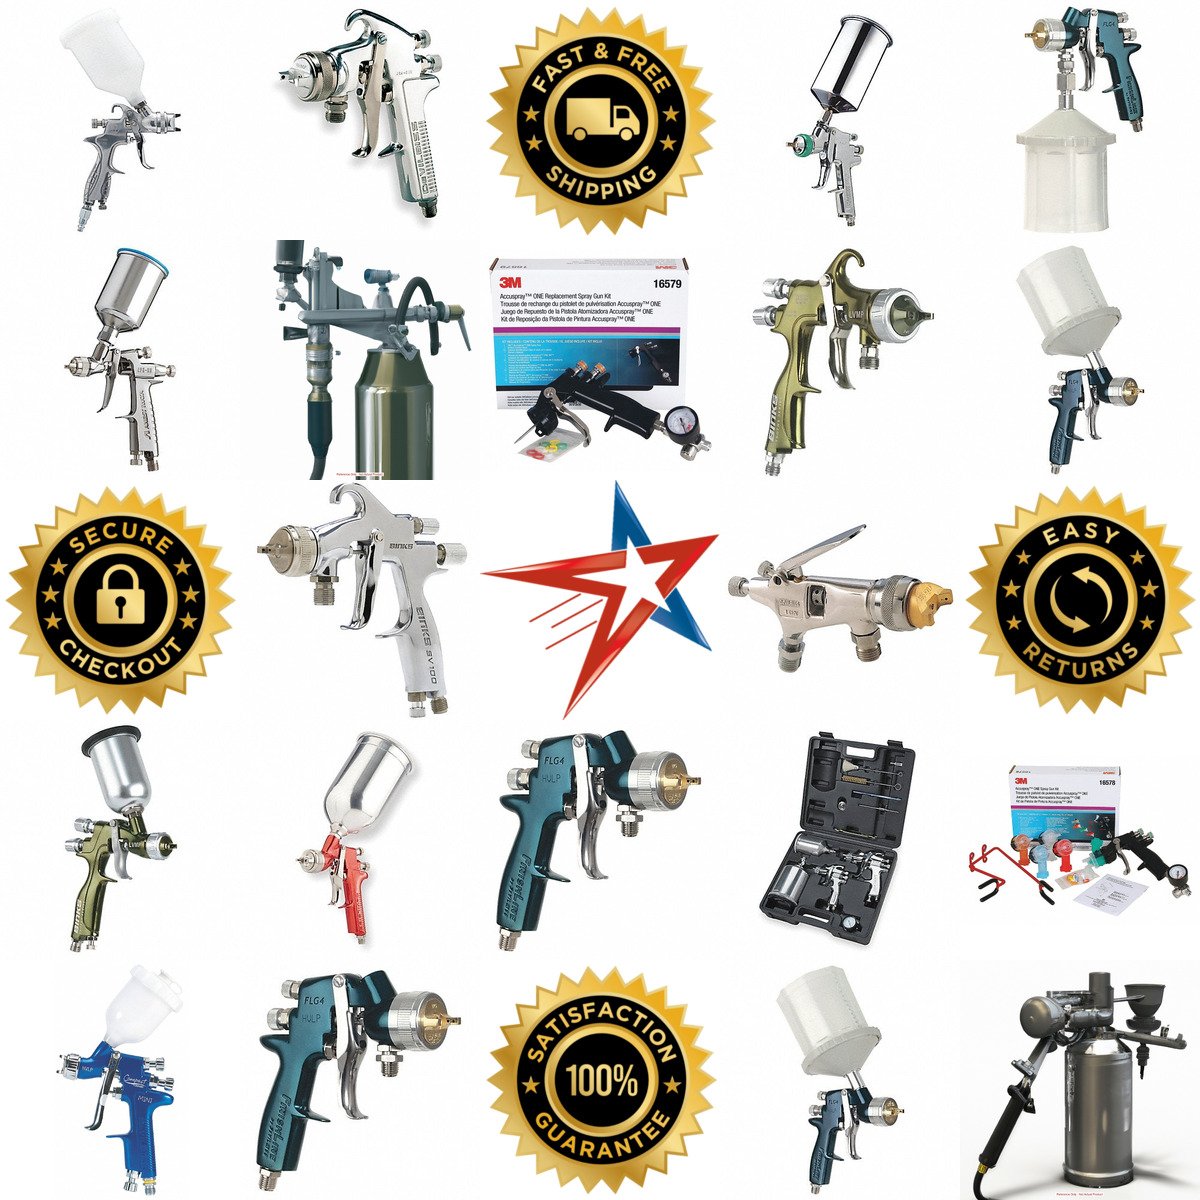 A selection of Hvlp Spray Guns products on GoVets